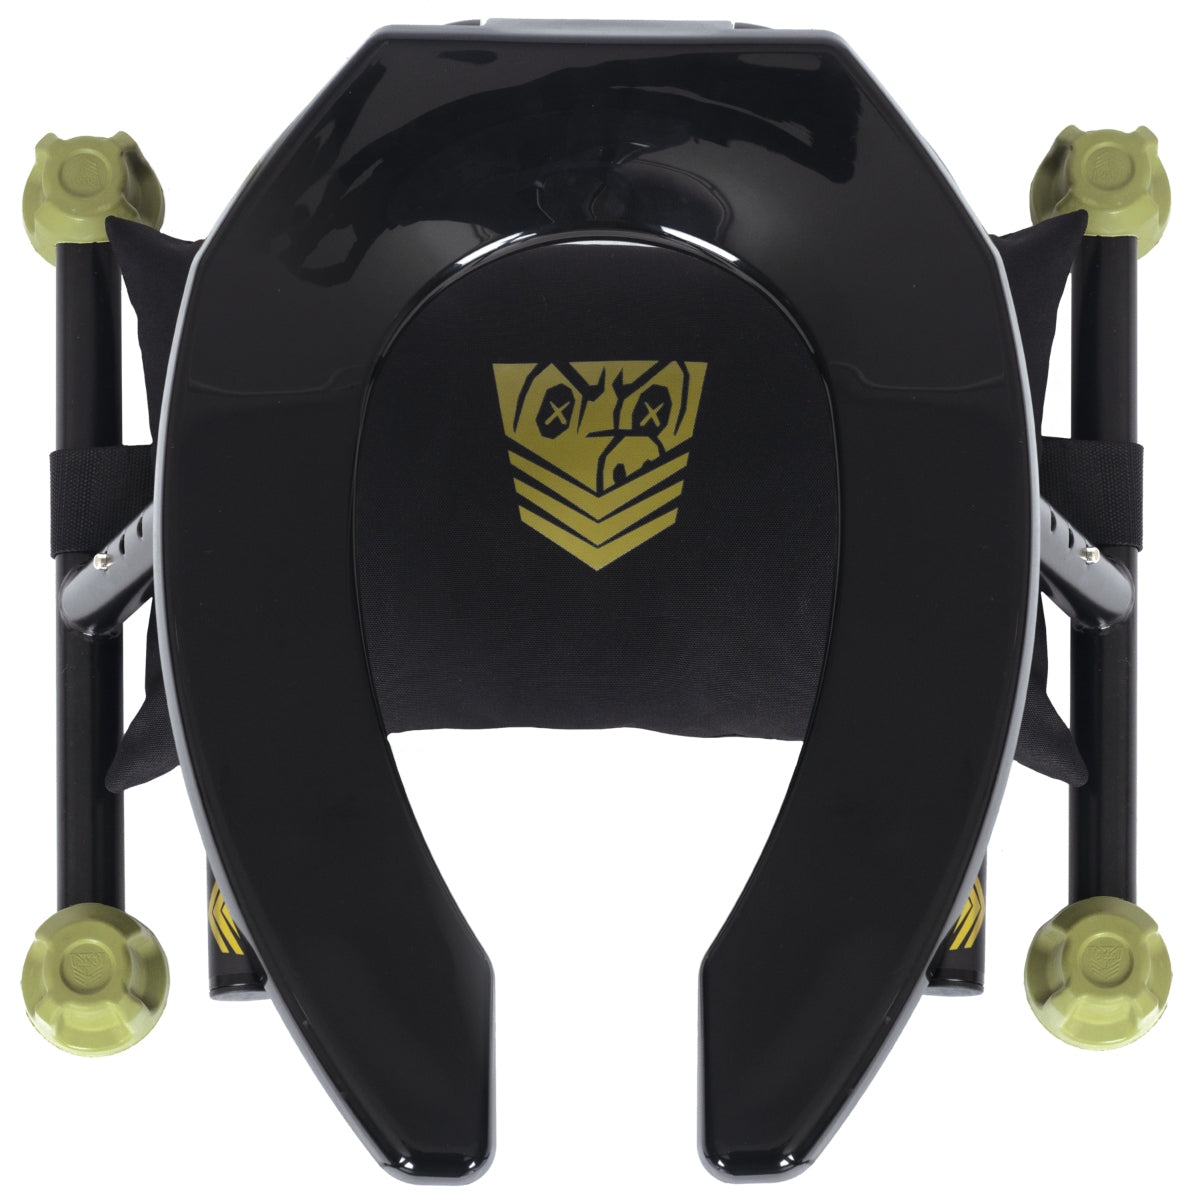 FORT TROFF Trench Rider Double Duty Rimming Chair